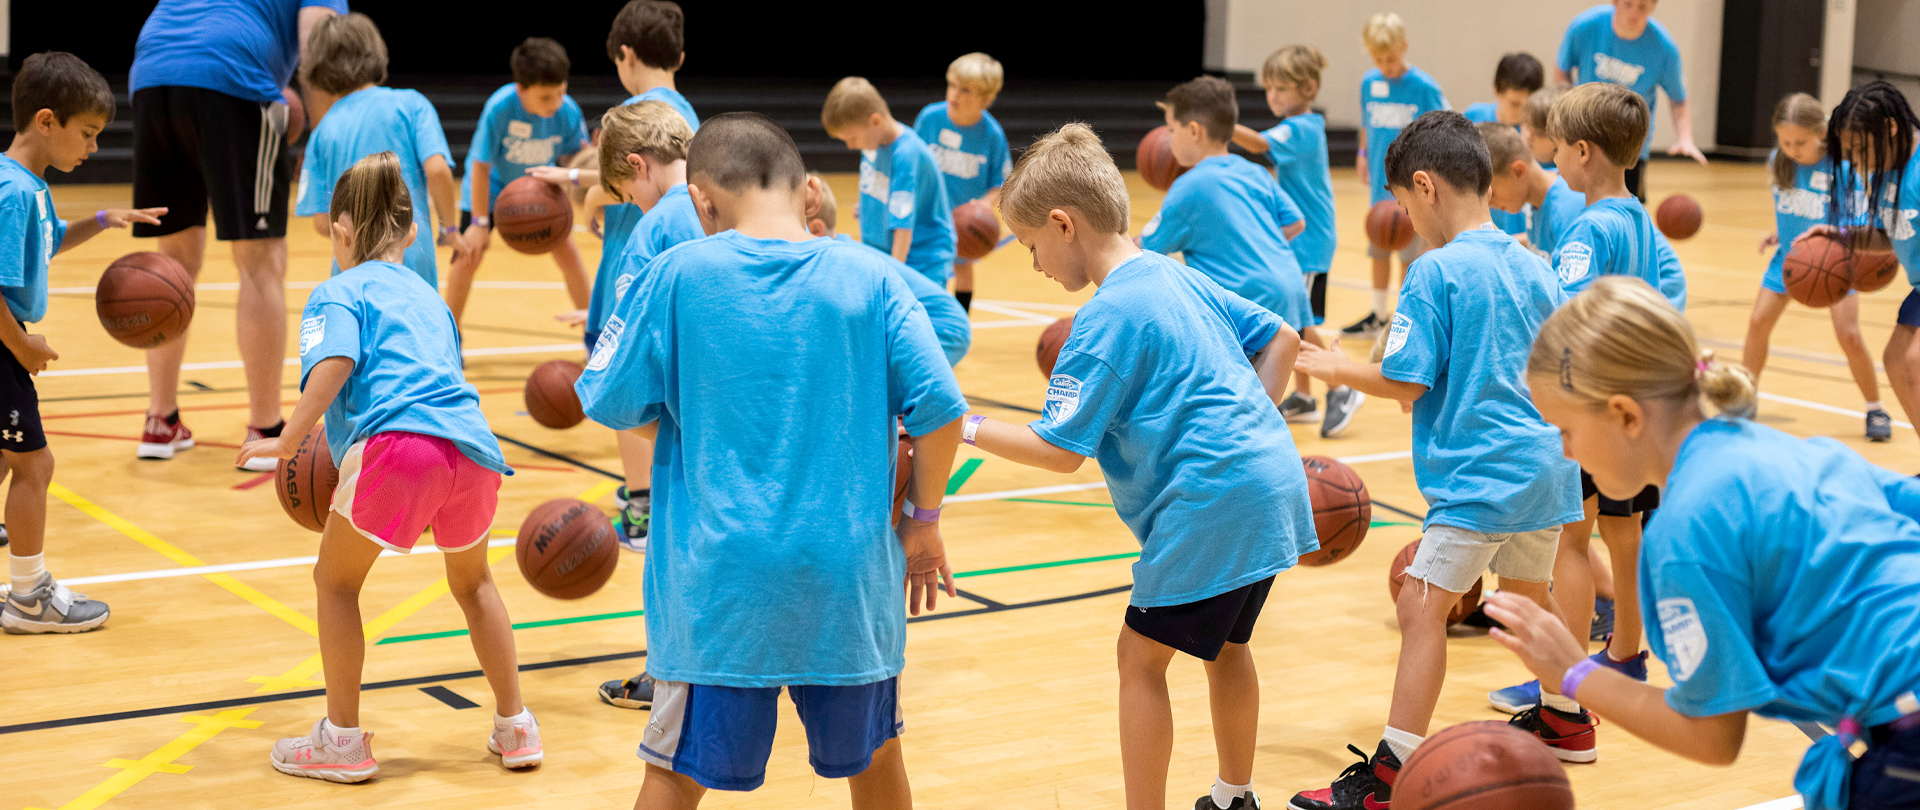 CHAMP Summer Camps
For Children & Students
Register now!
